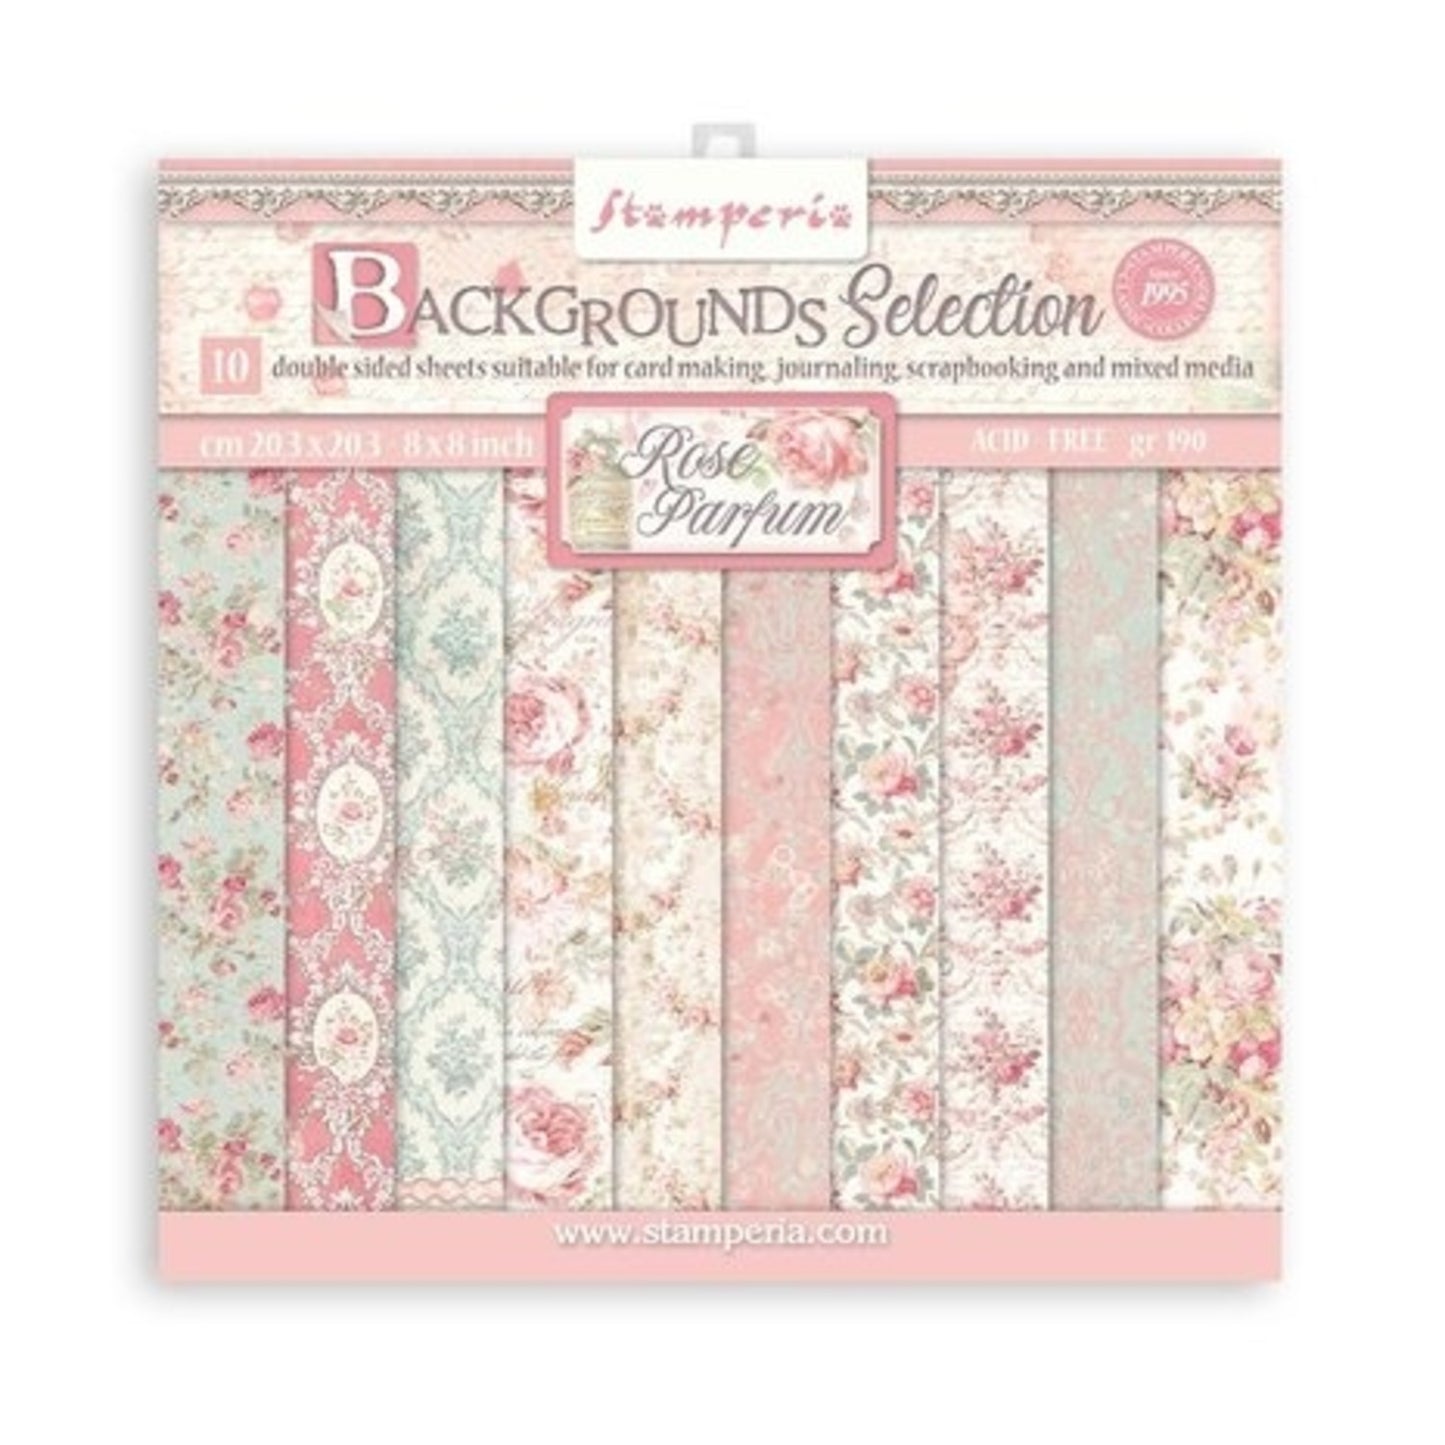 Stamperia - Backgrounds Selection Rose Parfum 8x8 inch